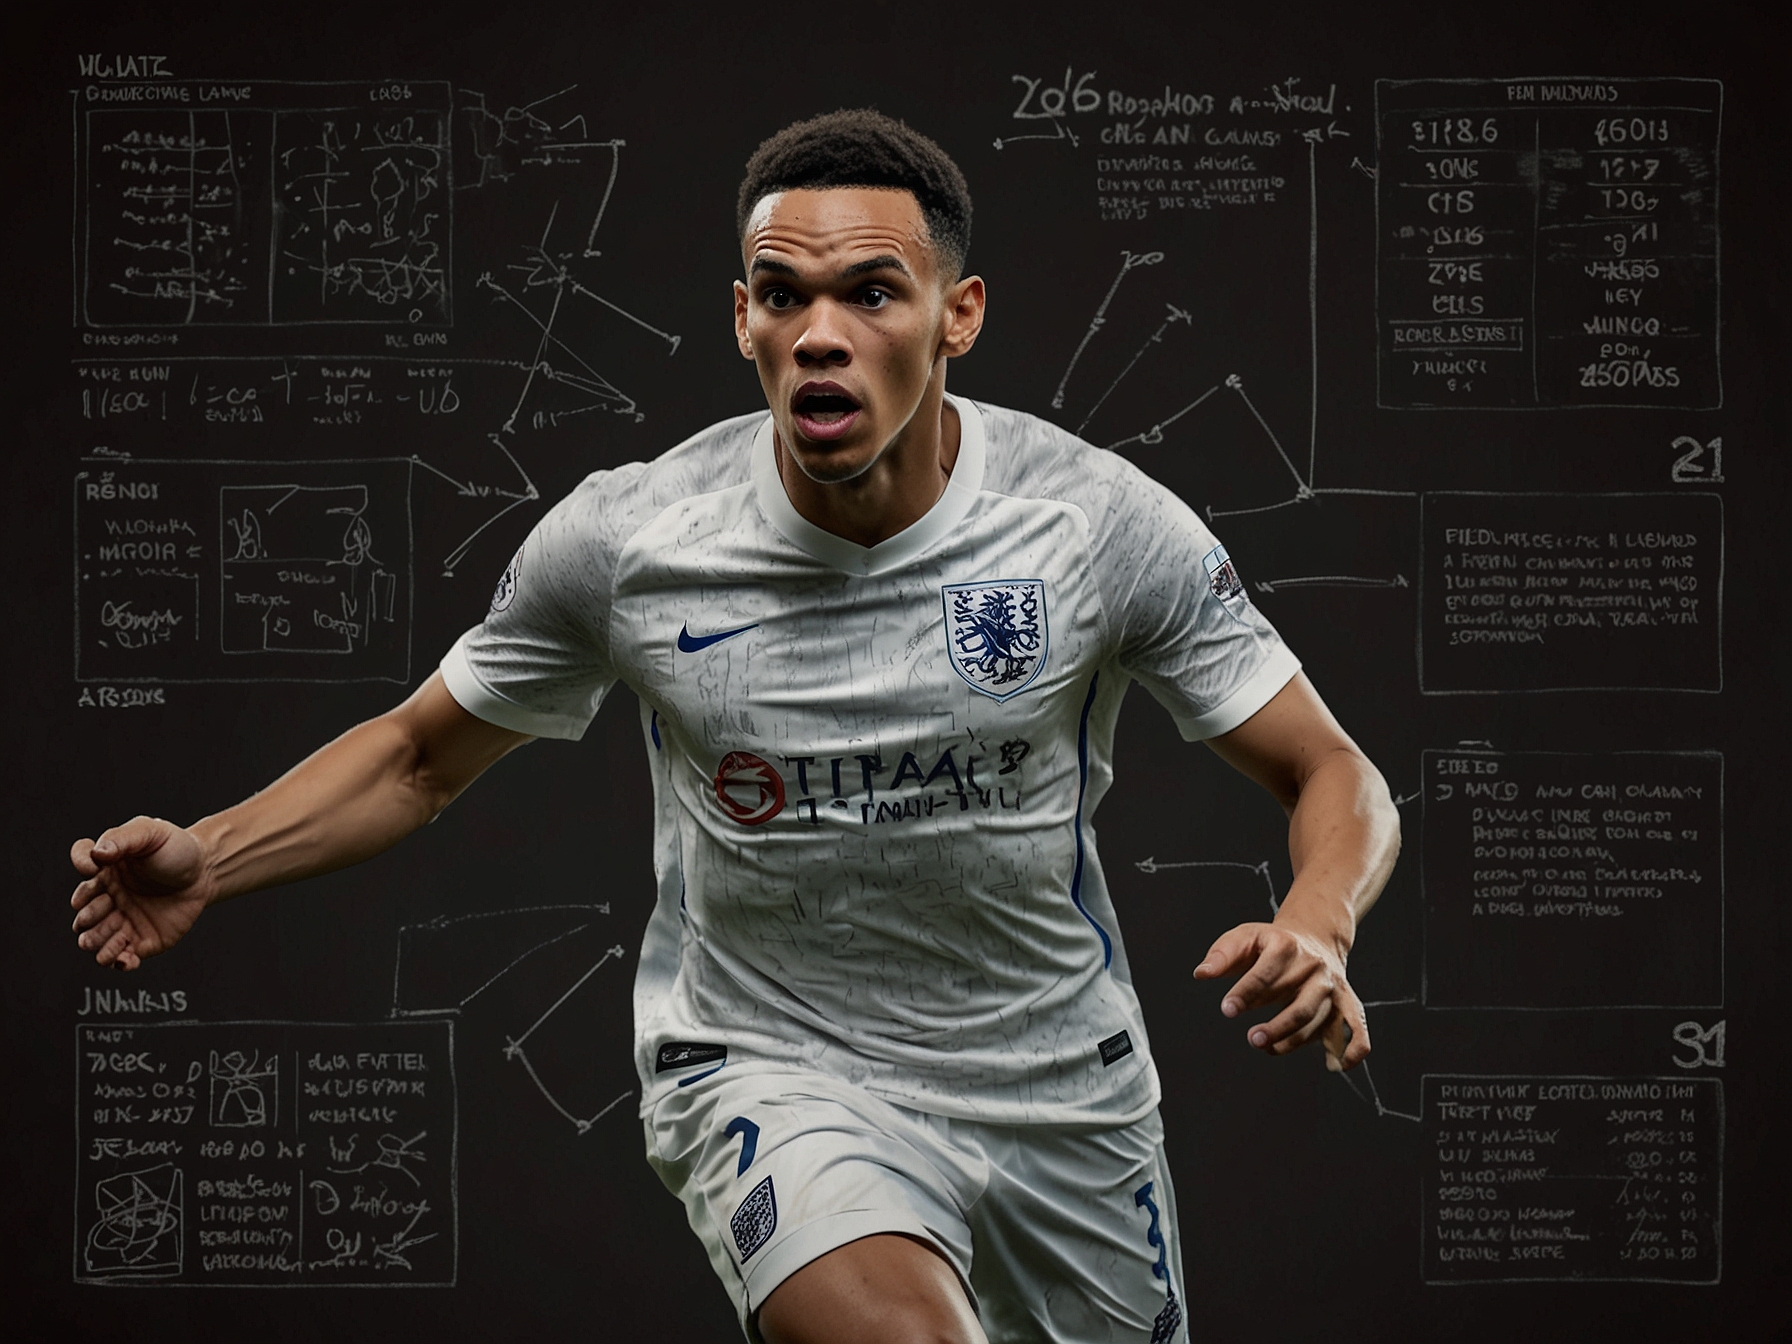 Trent Alexander-Arnold, visibly out of sync, struggles to maintain possession in his experimental midfield role, highlighting the tactical challenges faced by the England team.